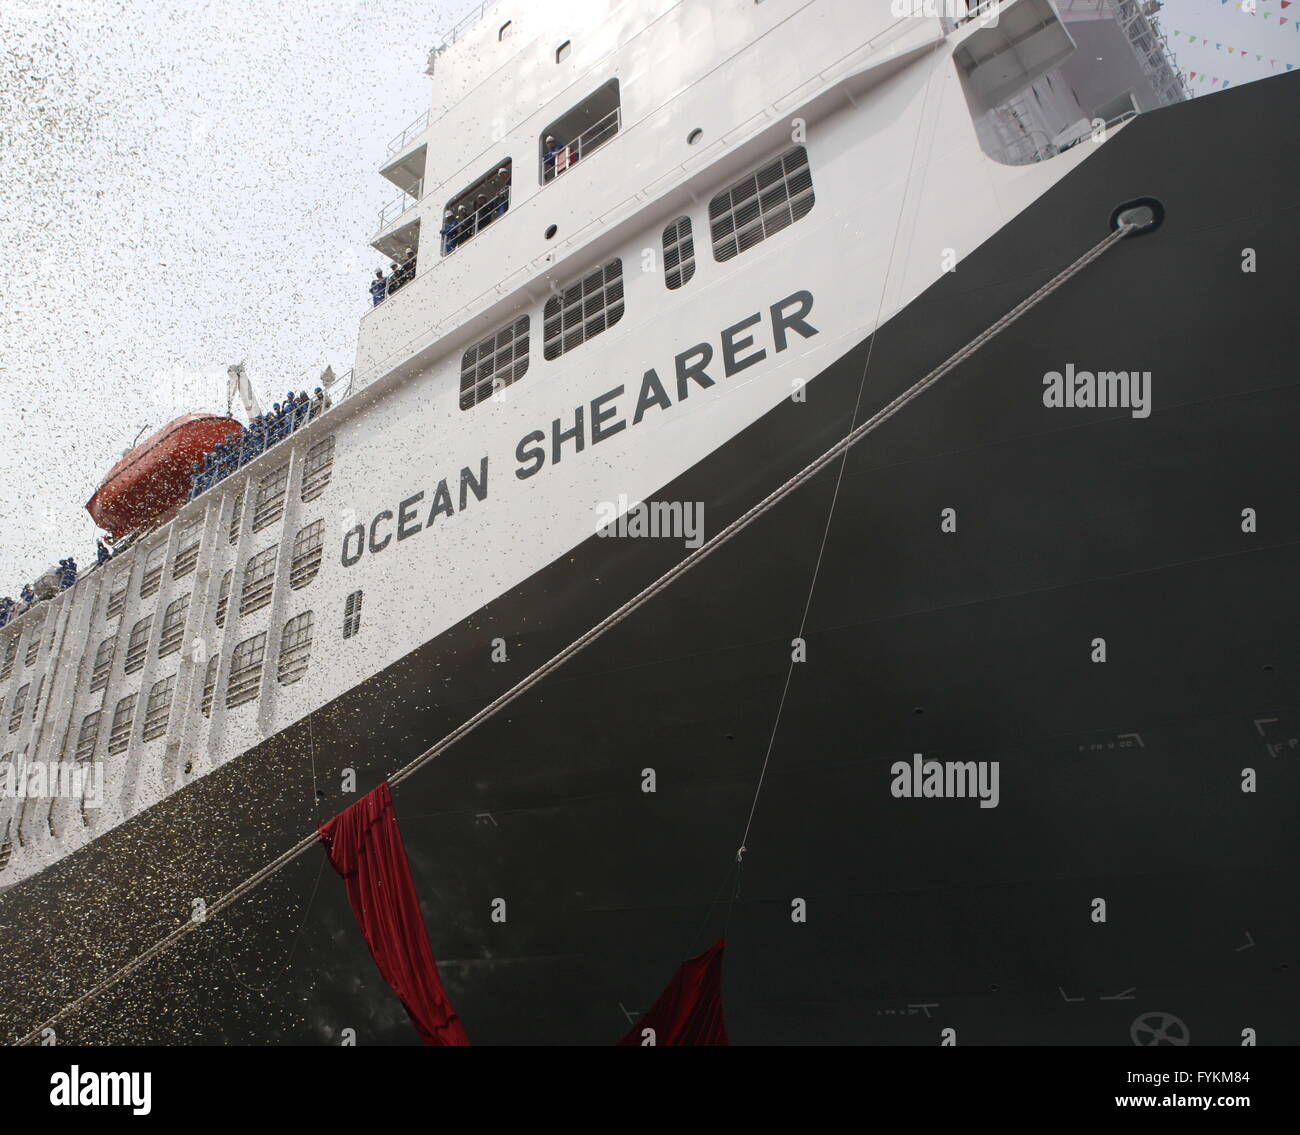 (160427) -- DALIAN, April 27, 2016 (Xinhua) -- Photo taken on April 27, 2016 shows the livestock carrier Ocean Shearer at its unveiling ceremony in Dalian, northeast China's Liaoning Province. The ship is 189.5 meters long, 31.1 meters wide and  and 24.33 meters in moulded depth. Constructed by Cosco Shipyard in Dalian, it is the current largest livestock carrier built in a Chinese shipyard, which could accommodate about 17,000 live cattle. (Xinhua/Ding Hongfa) (zhs) Stock Photo